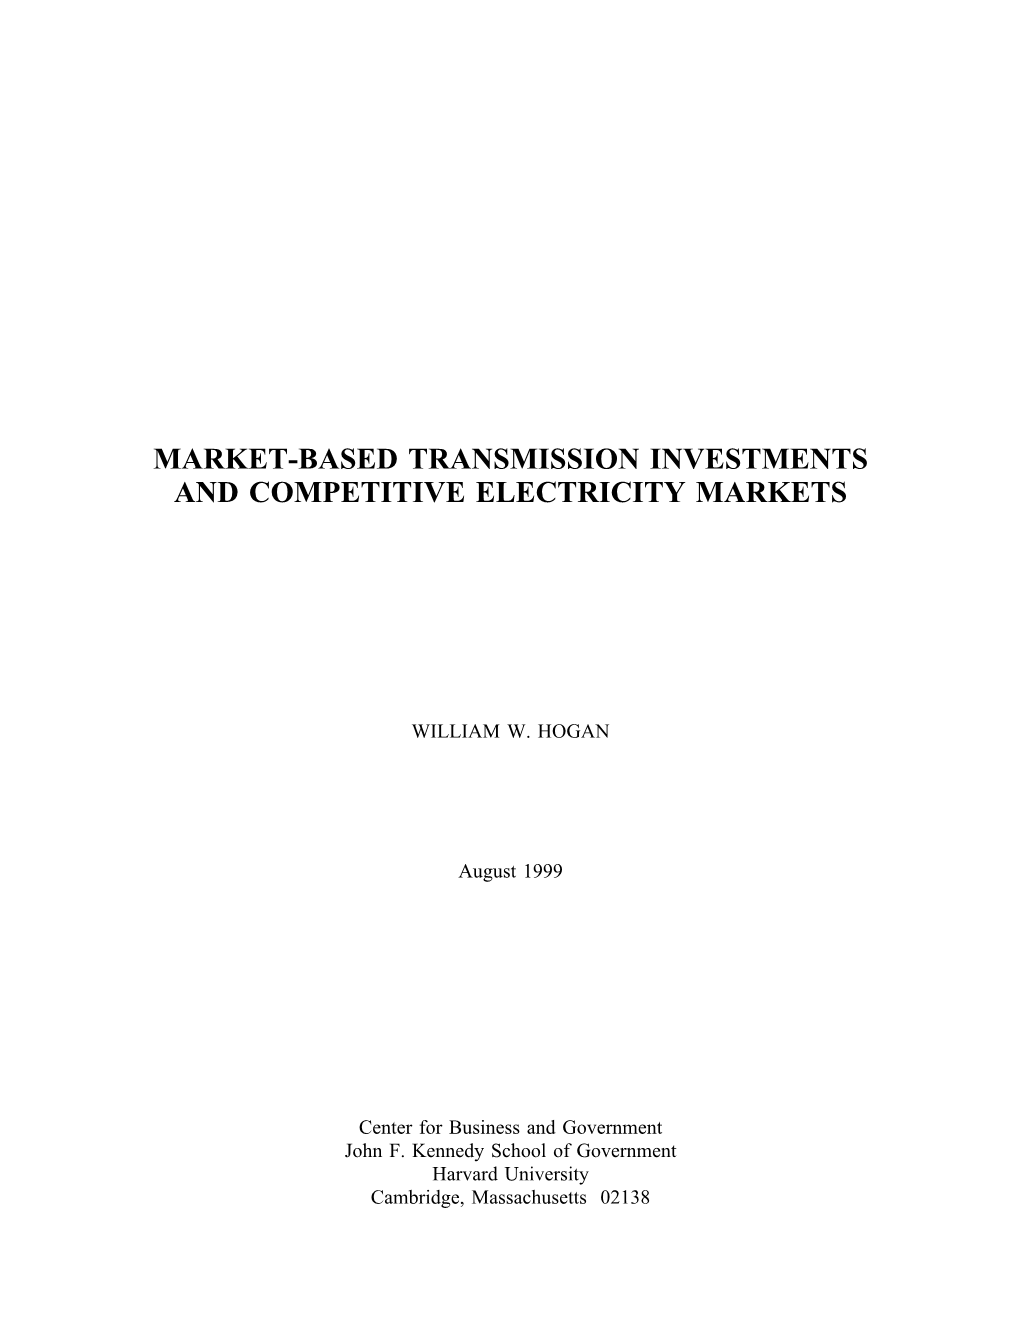 Market-Based Transmission Investments and Competitive Electricity Markets